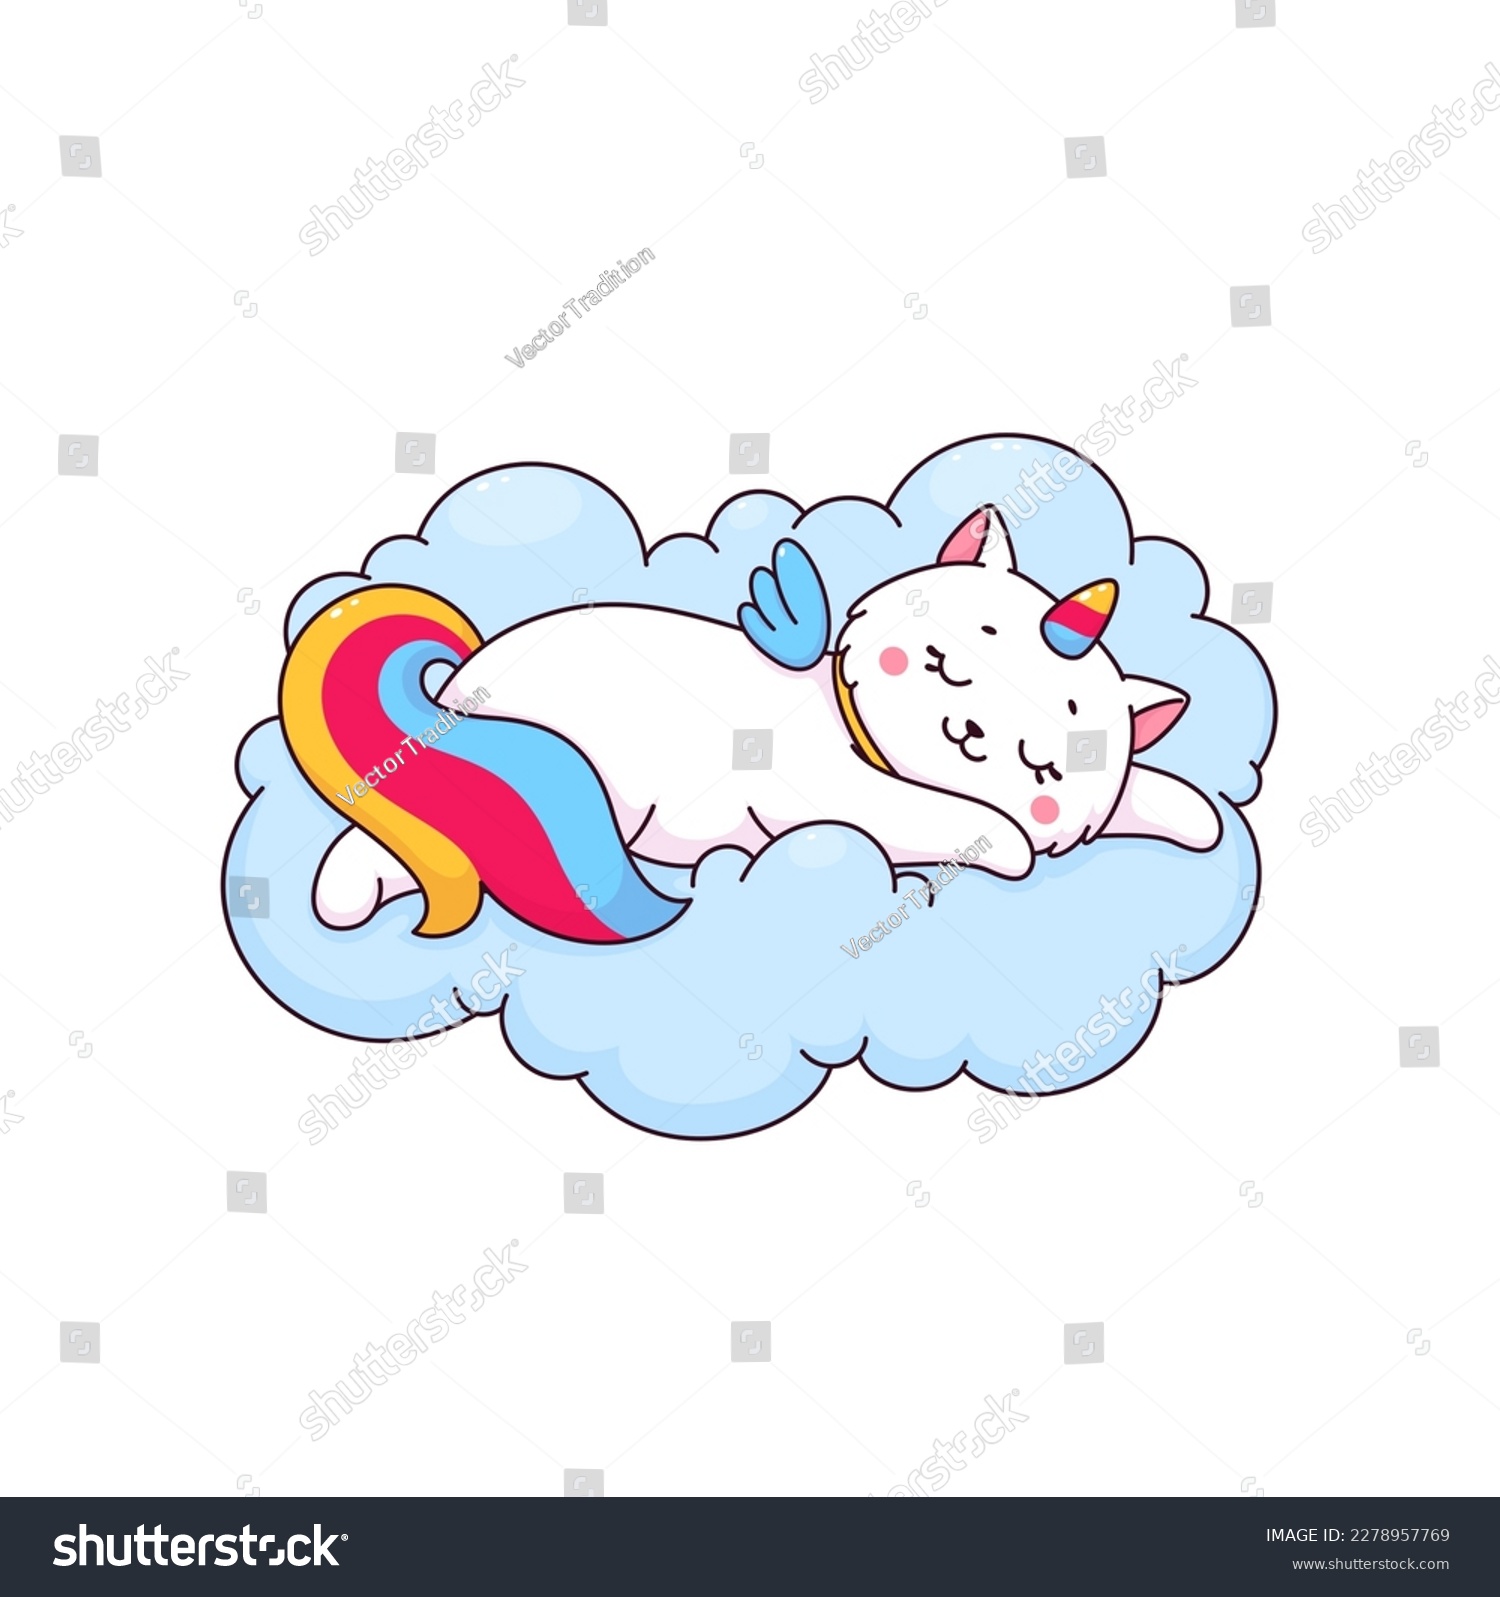 SVG of Cartoon cute caticorn character. Vector white unicorn cat sleeping on soft fluffy cloud. Kawaii magic kitten personage with colorful rainbow tail, horn and wings. Funny fairytale kitty sleep in sky svg